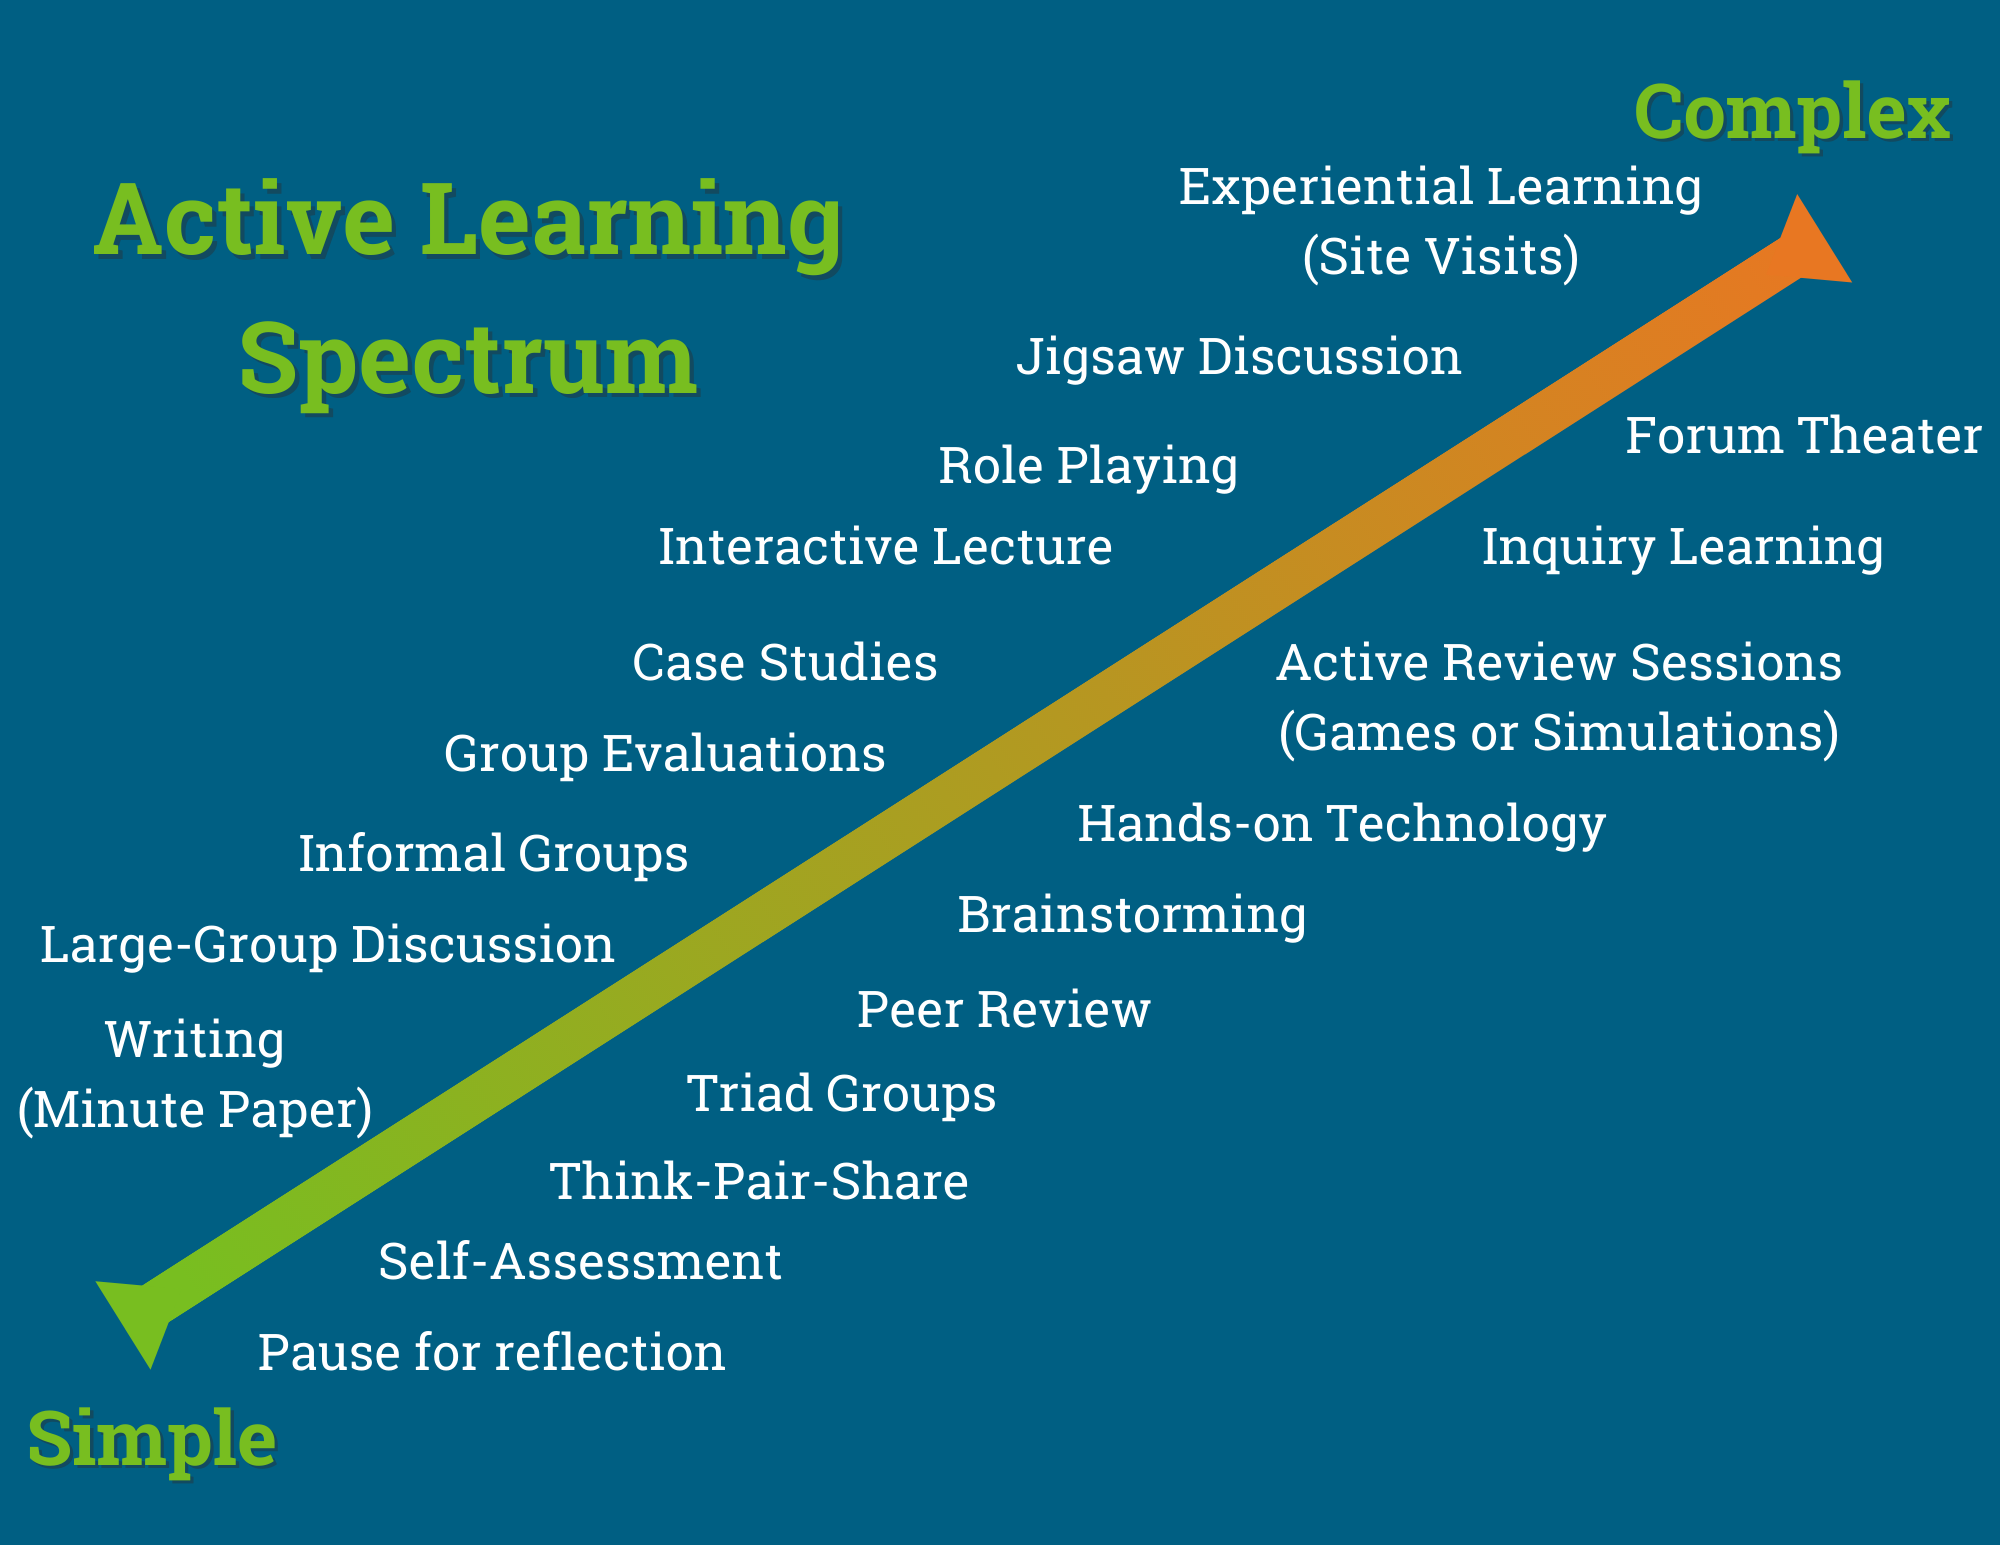 The Active Learning Spectrum, presented from Simple to Complex: Pause for reflection, writing (minute paper), self-assessment, large-group discussion, think-pair-share, informal groups, triad groups, group evaluations, peer review, brainstorming, case studies, hands-on technology, interactive lecture, active review sessions (games or simualtions), role playing, jigsaw discussion, inquiry learning